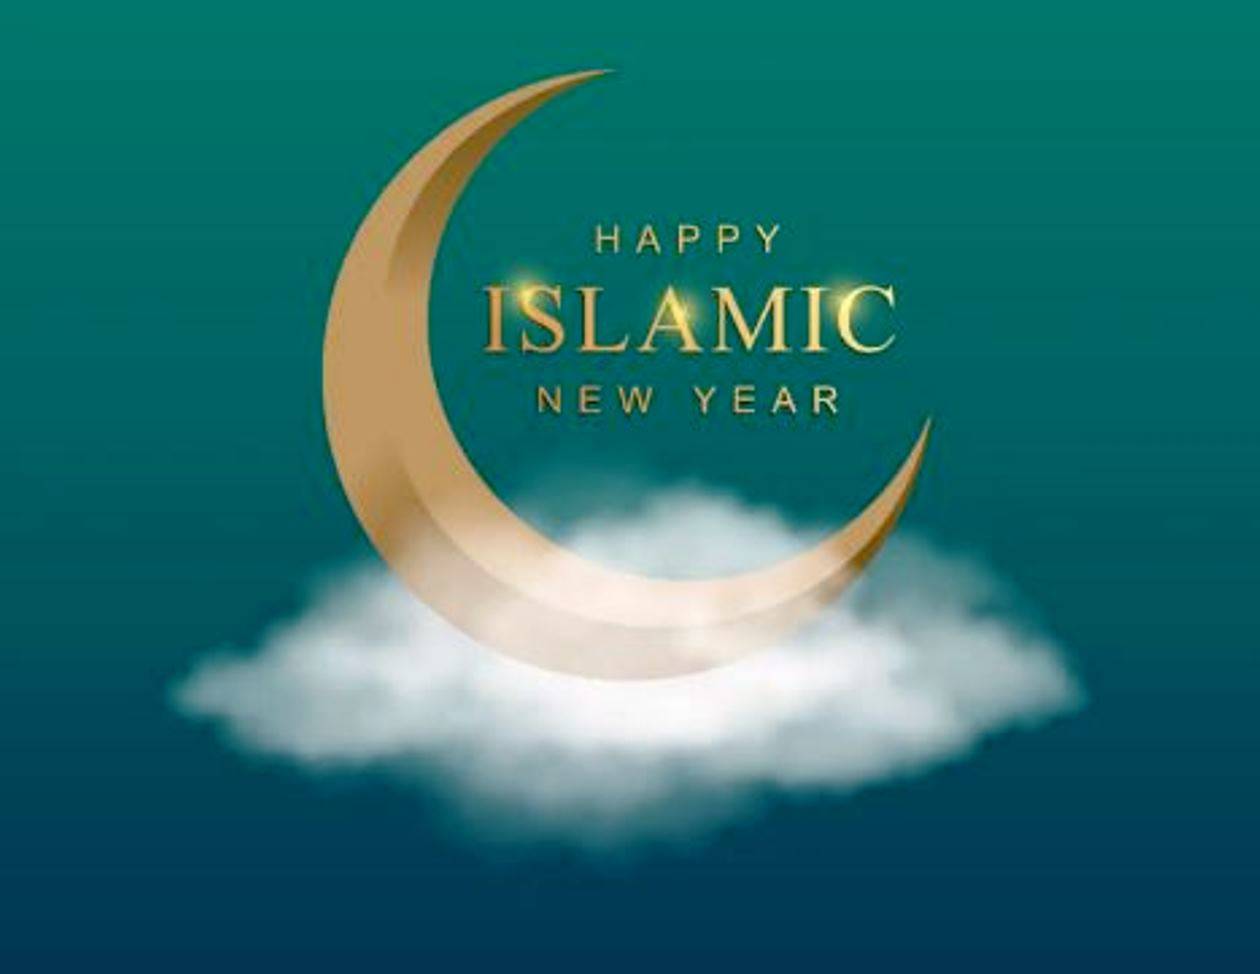 Islamic calendar new year starts from today